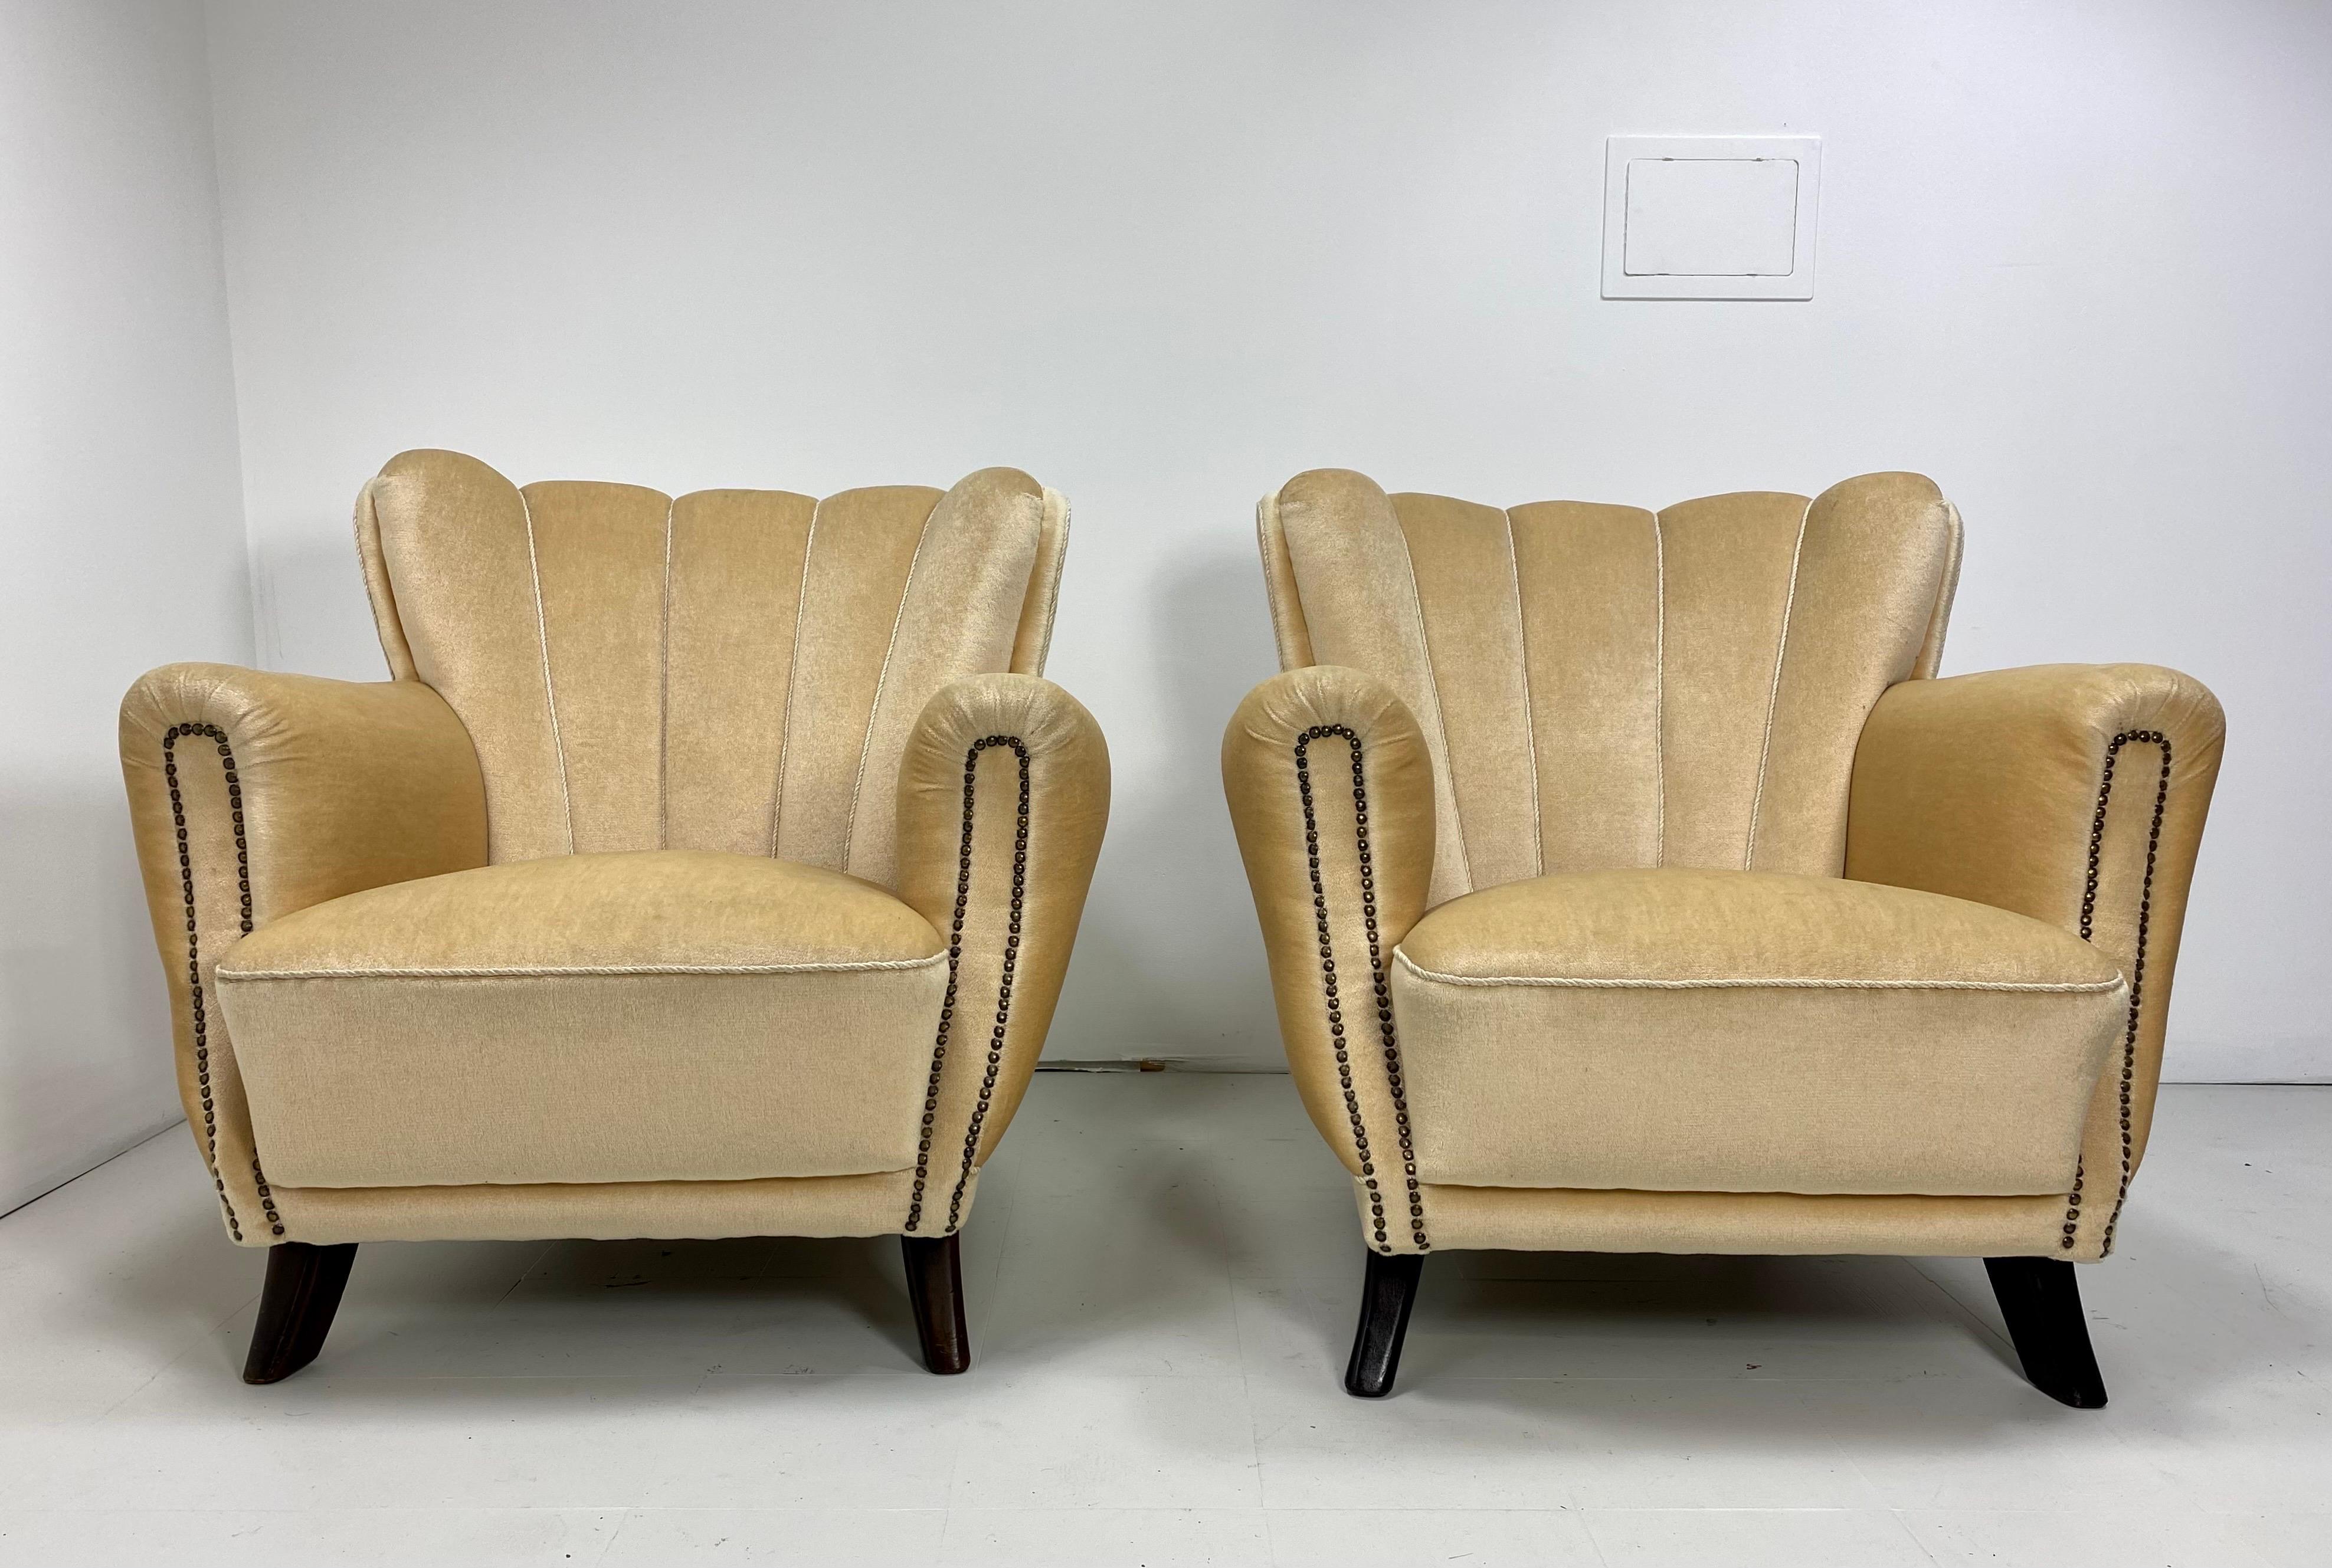 Pair of 1930s Swedish lounge chairs. Stained beech legs. Vintage velvet upholstery. Sculpted upholstery along the profile of the chairs. Nail head detailing.